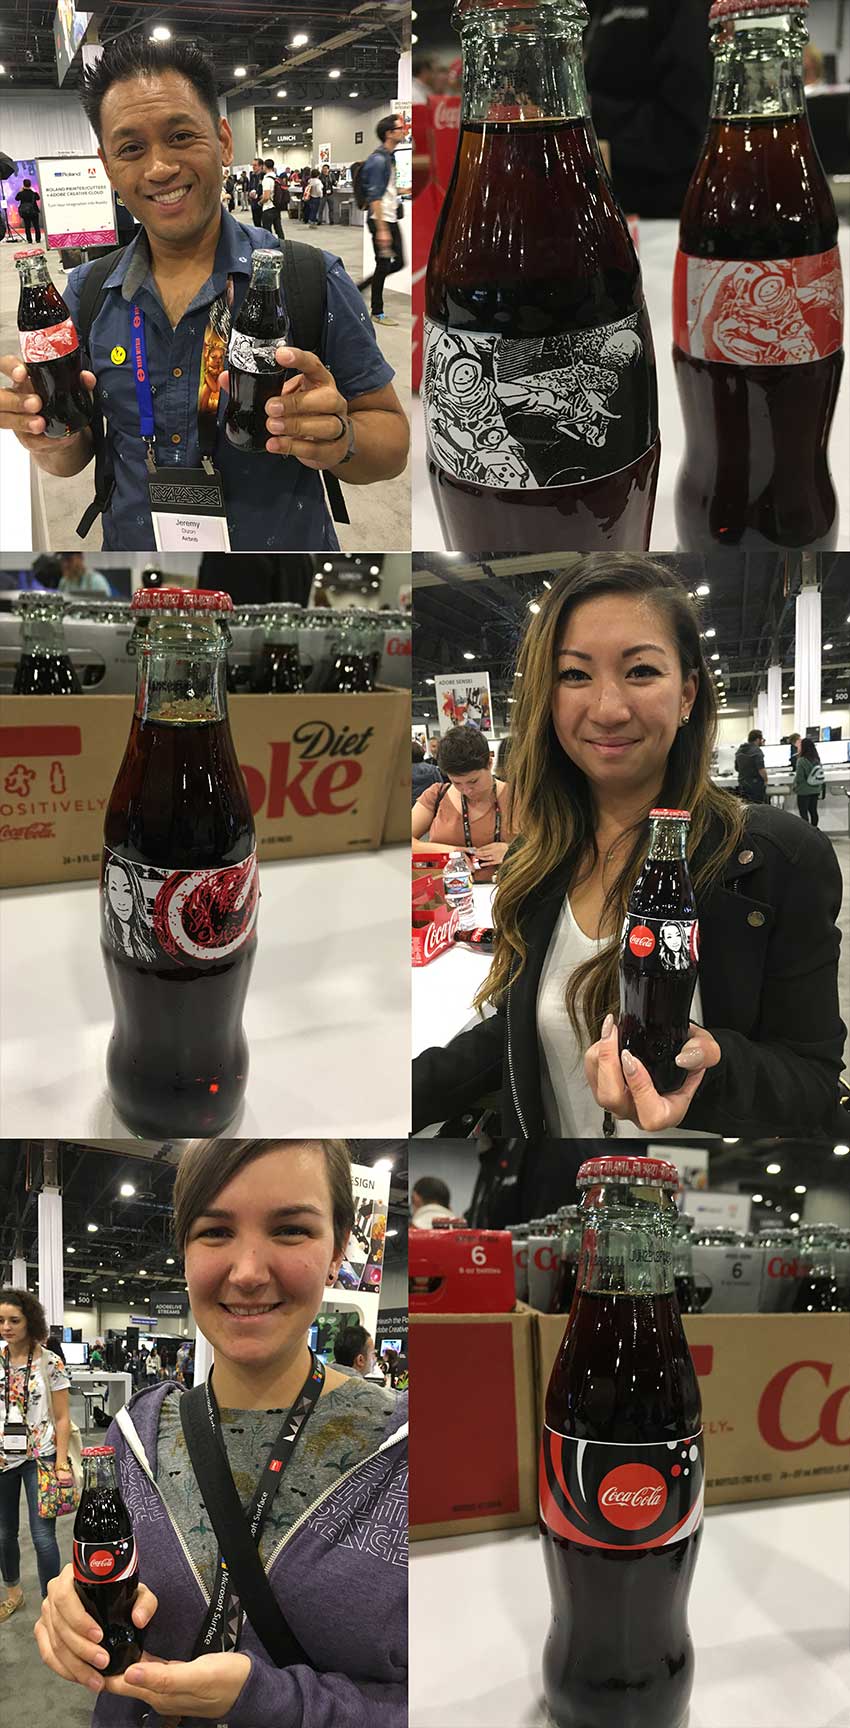 Adobe max booth visitors with Coca cola labels